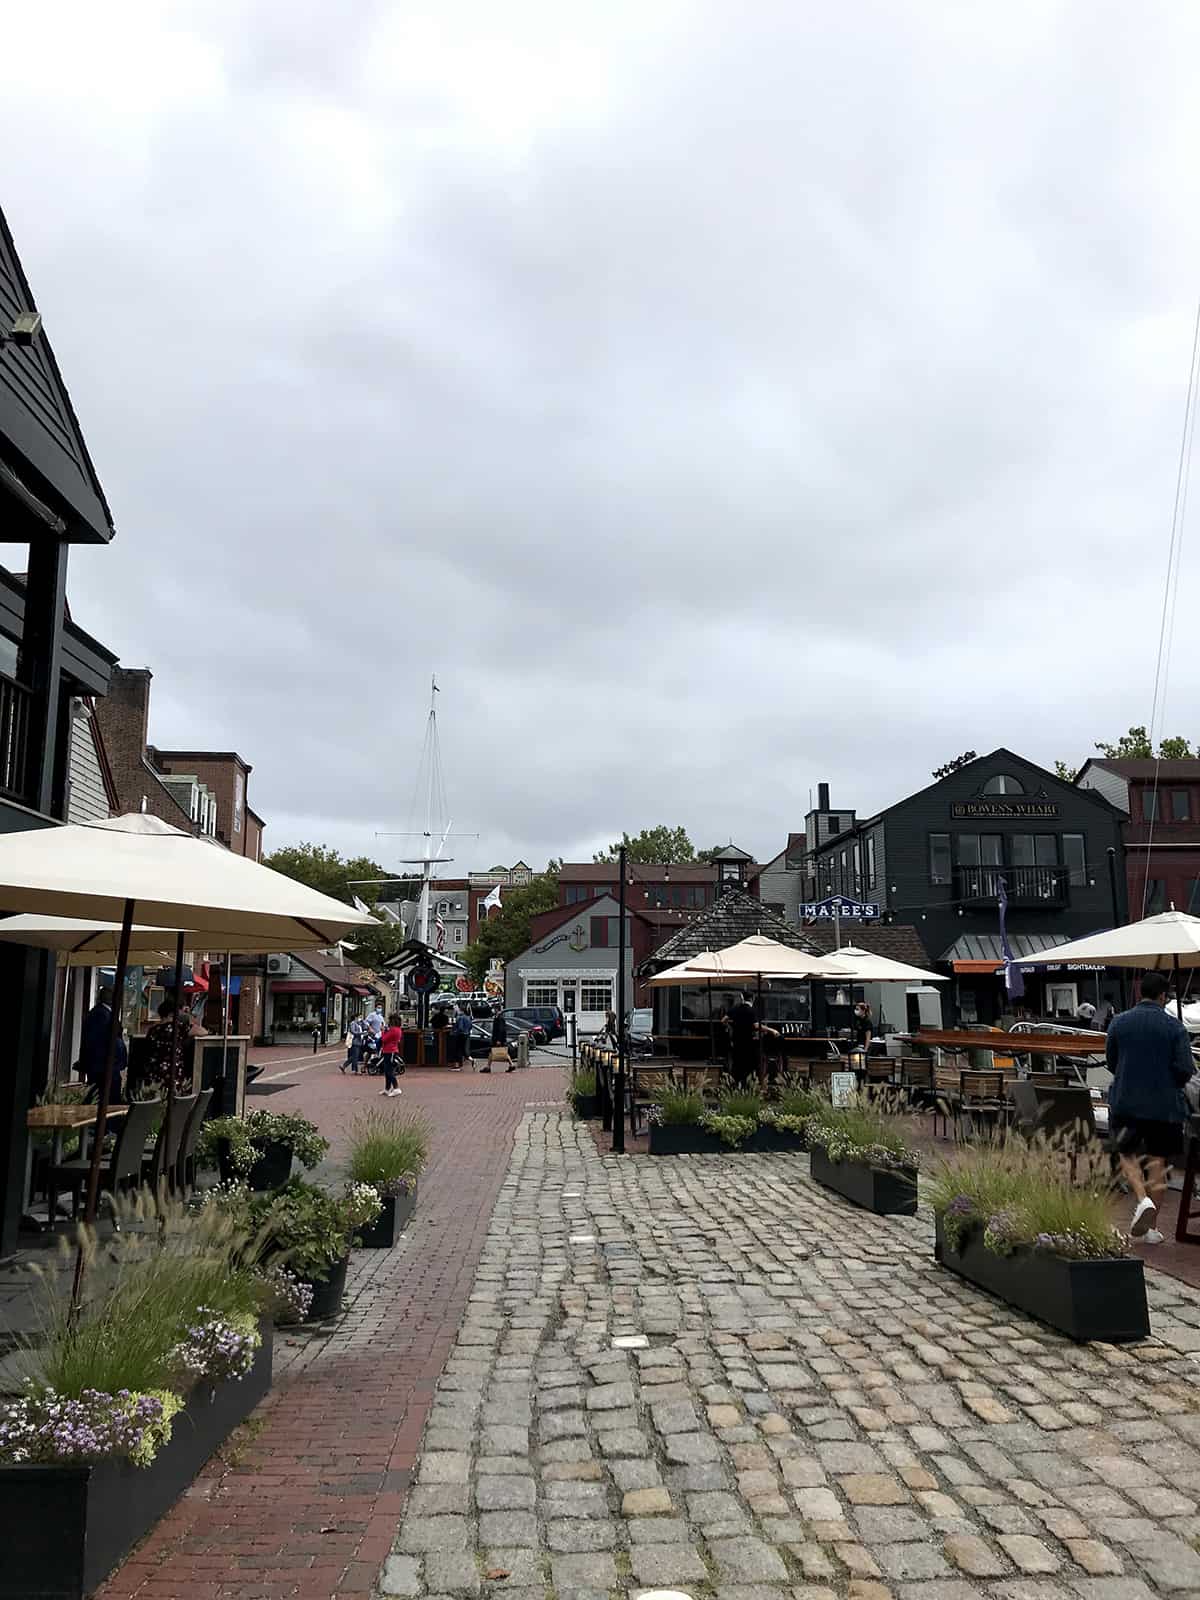 Bowen's Wharf in Newport RI - a popular wharf with lots of restaurants and views of the harbor